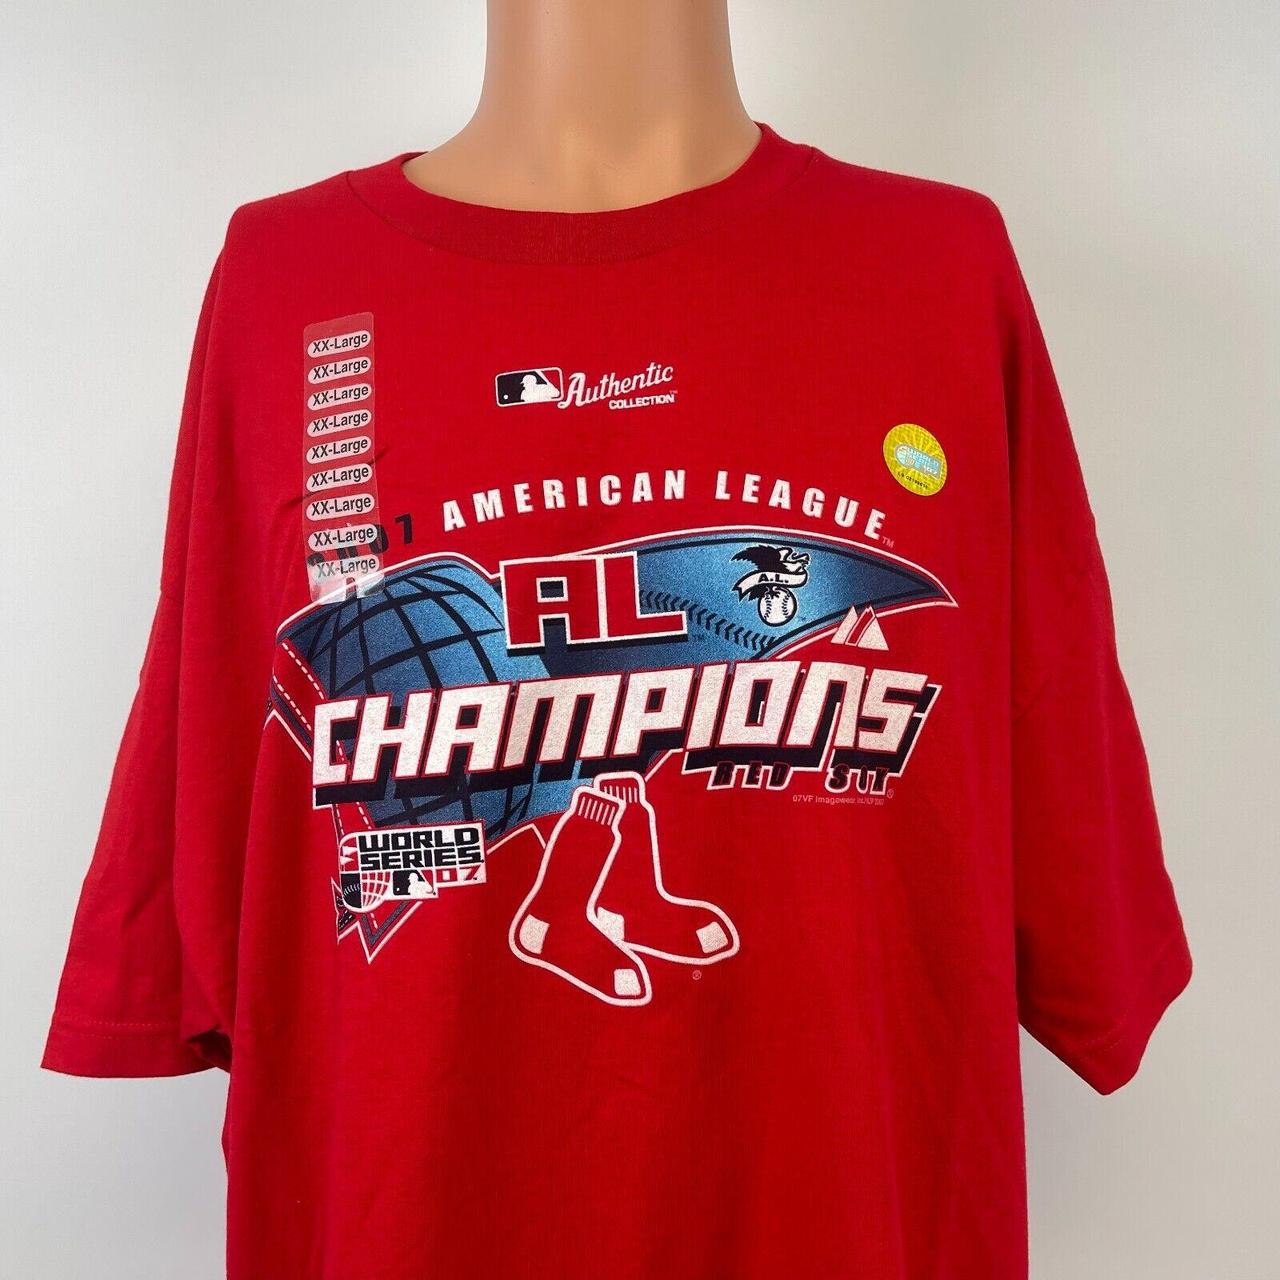 Boston Red Sox 2007 American League Champions T Shirt Majestic Red Men's 2XL